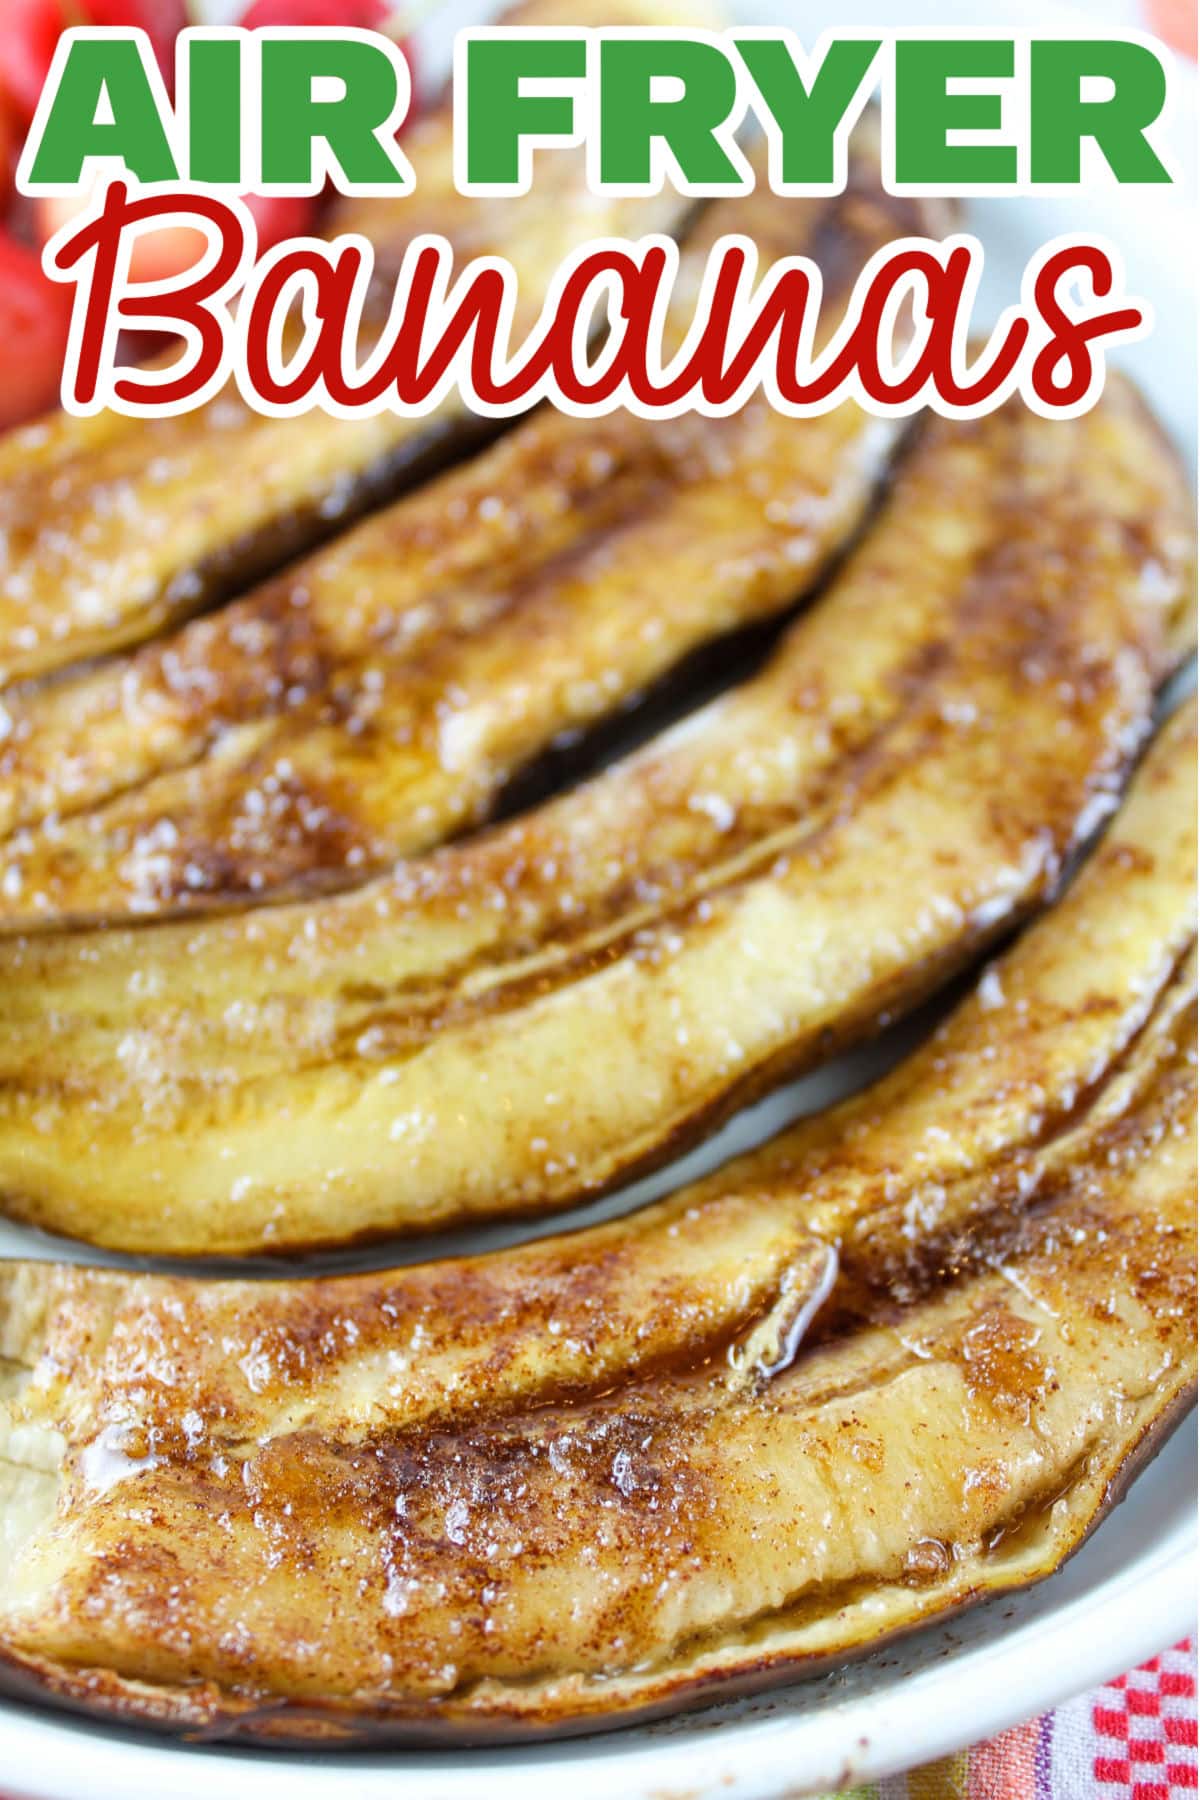 Air Fryer Bananas are the ONLY way I'll eat a banana! The brown sugar caramelizes and makes this a perfect breakfast or dessert! With only 3 simple ingredients, there's also no oil or butter added.  via @foodhussy